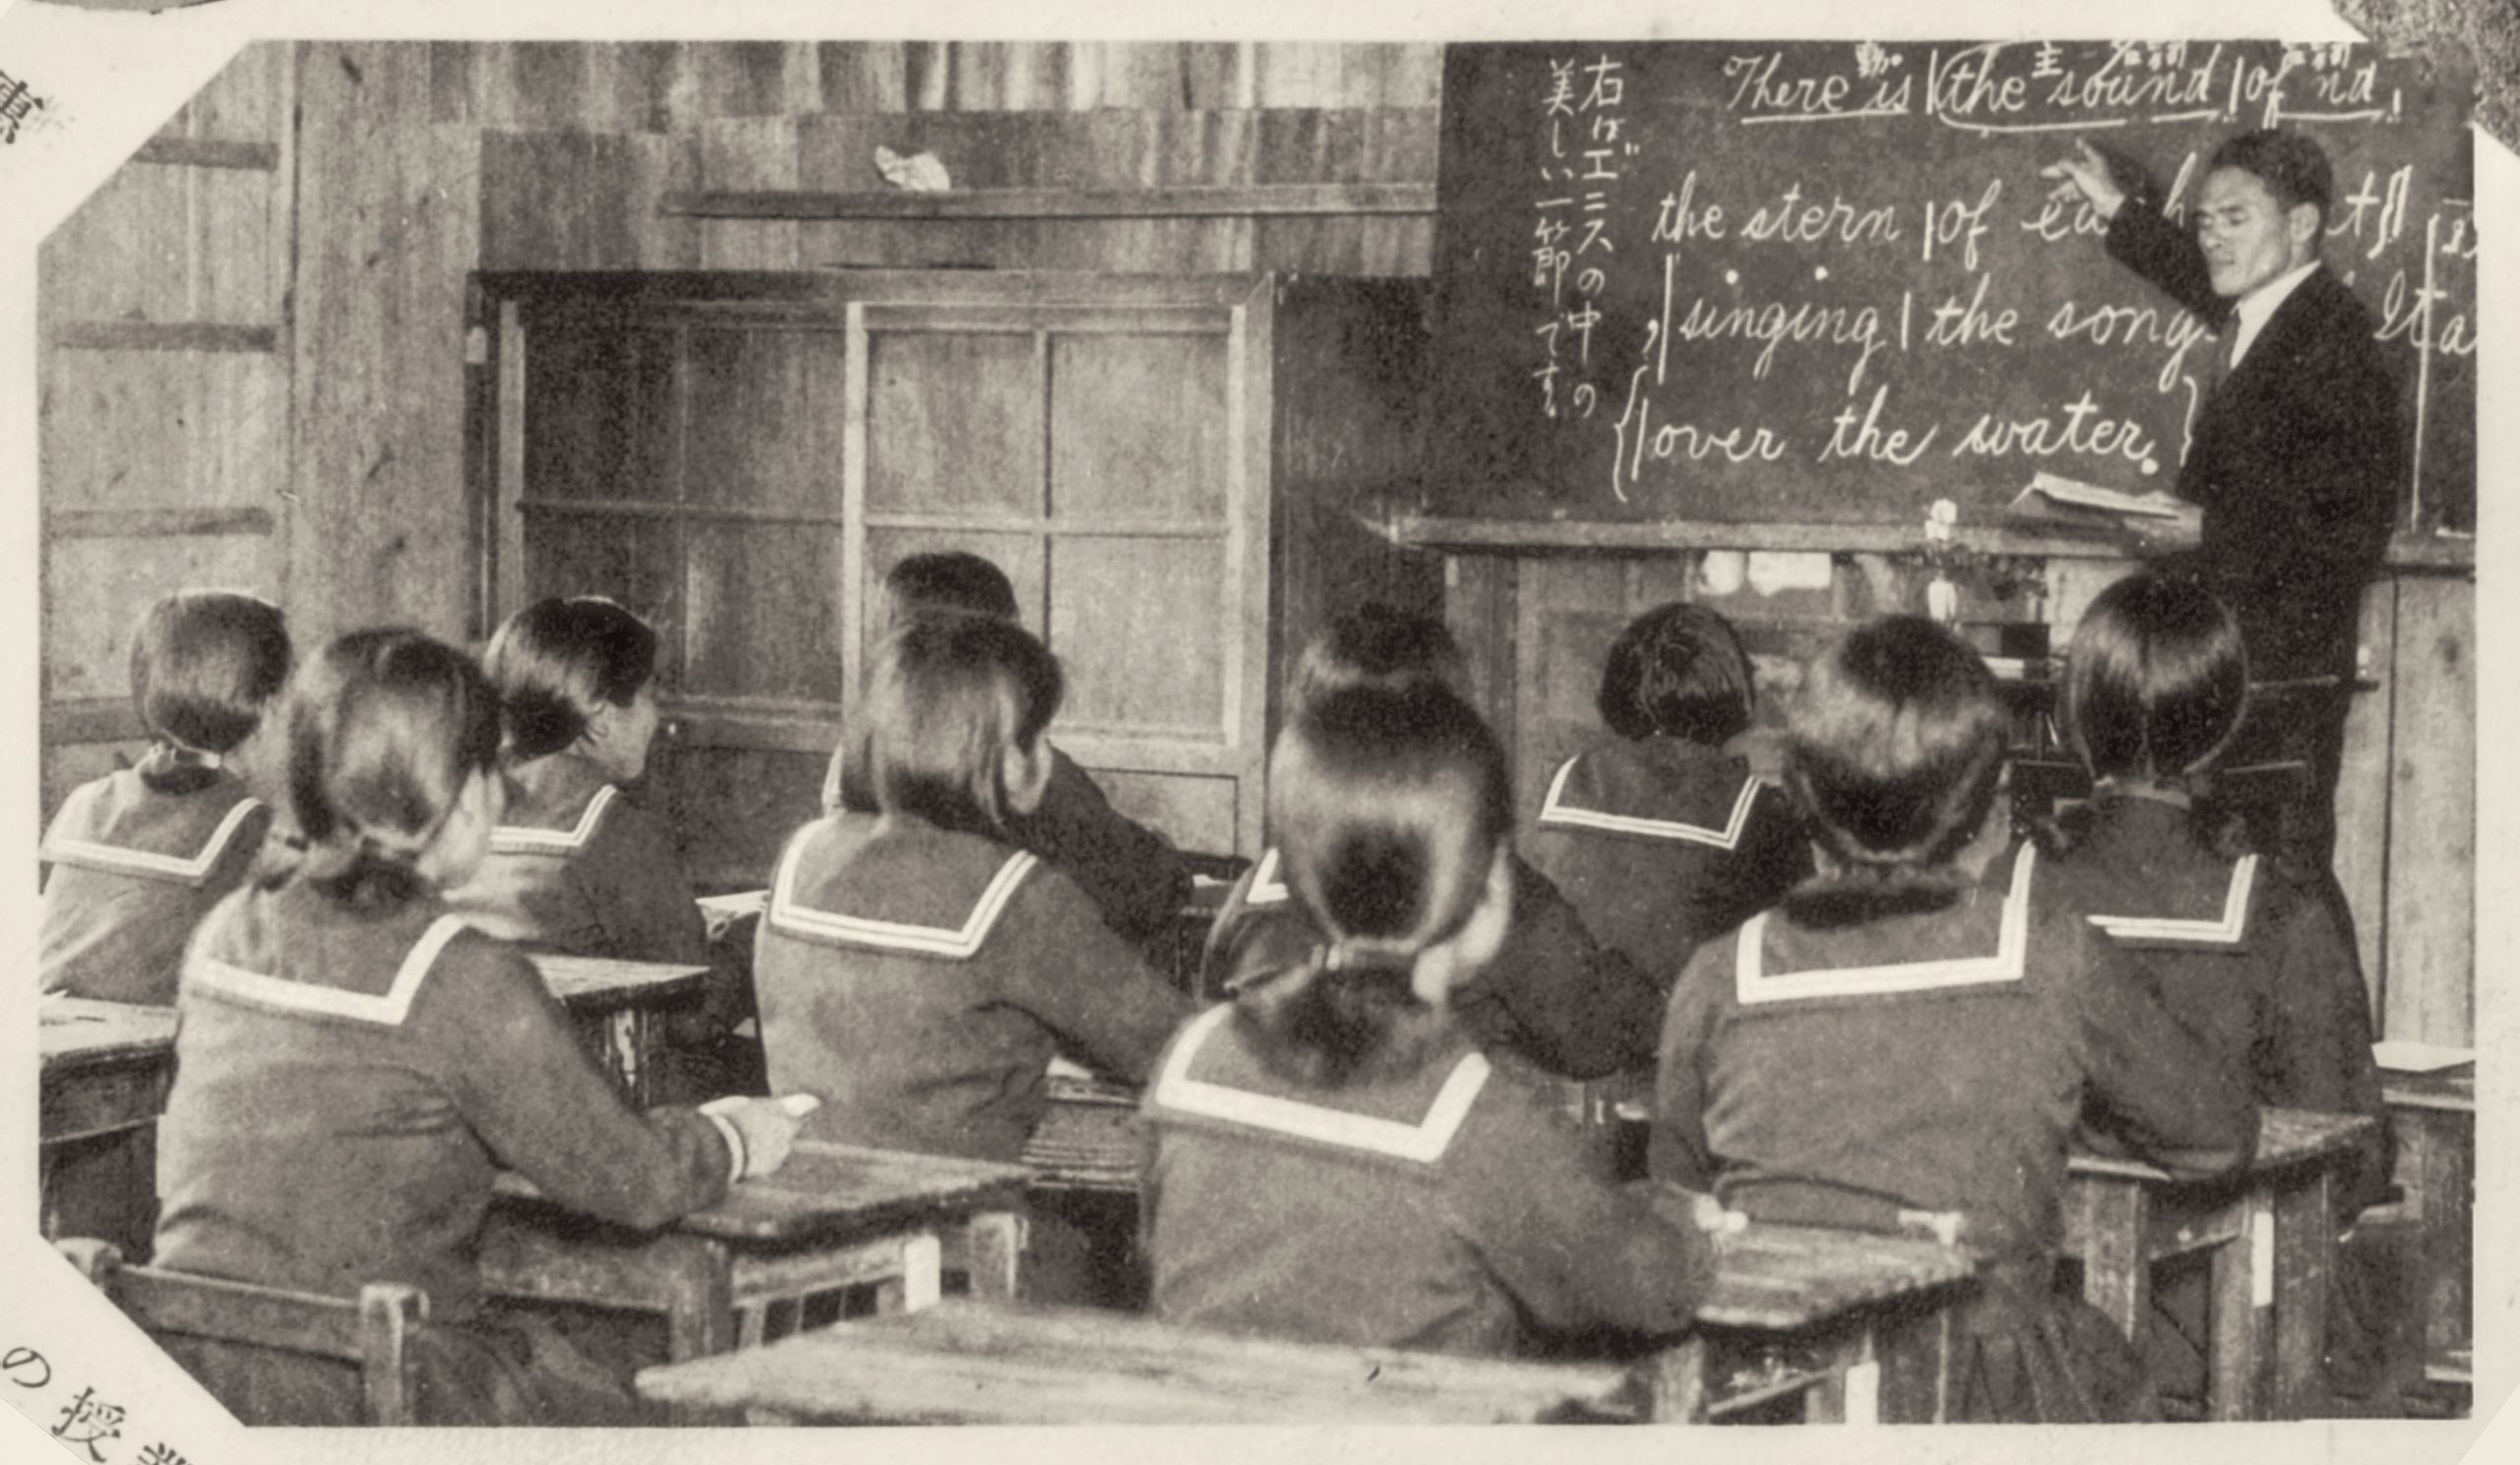 Black-and-white image of students and a teacher in a classroom from the "Himeyuri and Hawaii" exhibit.